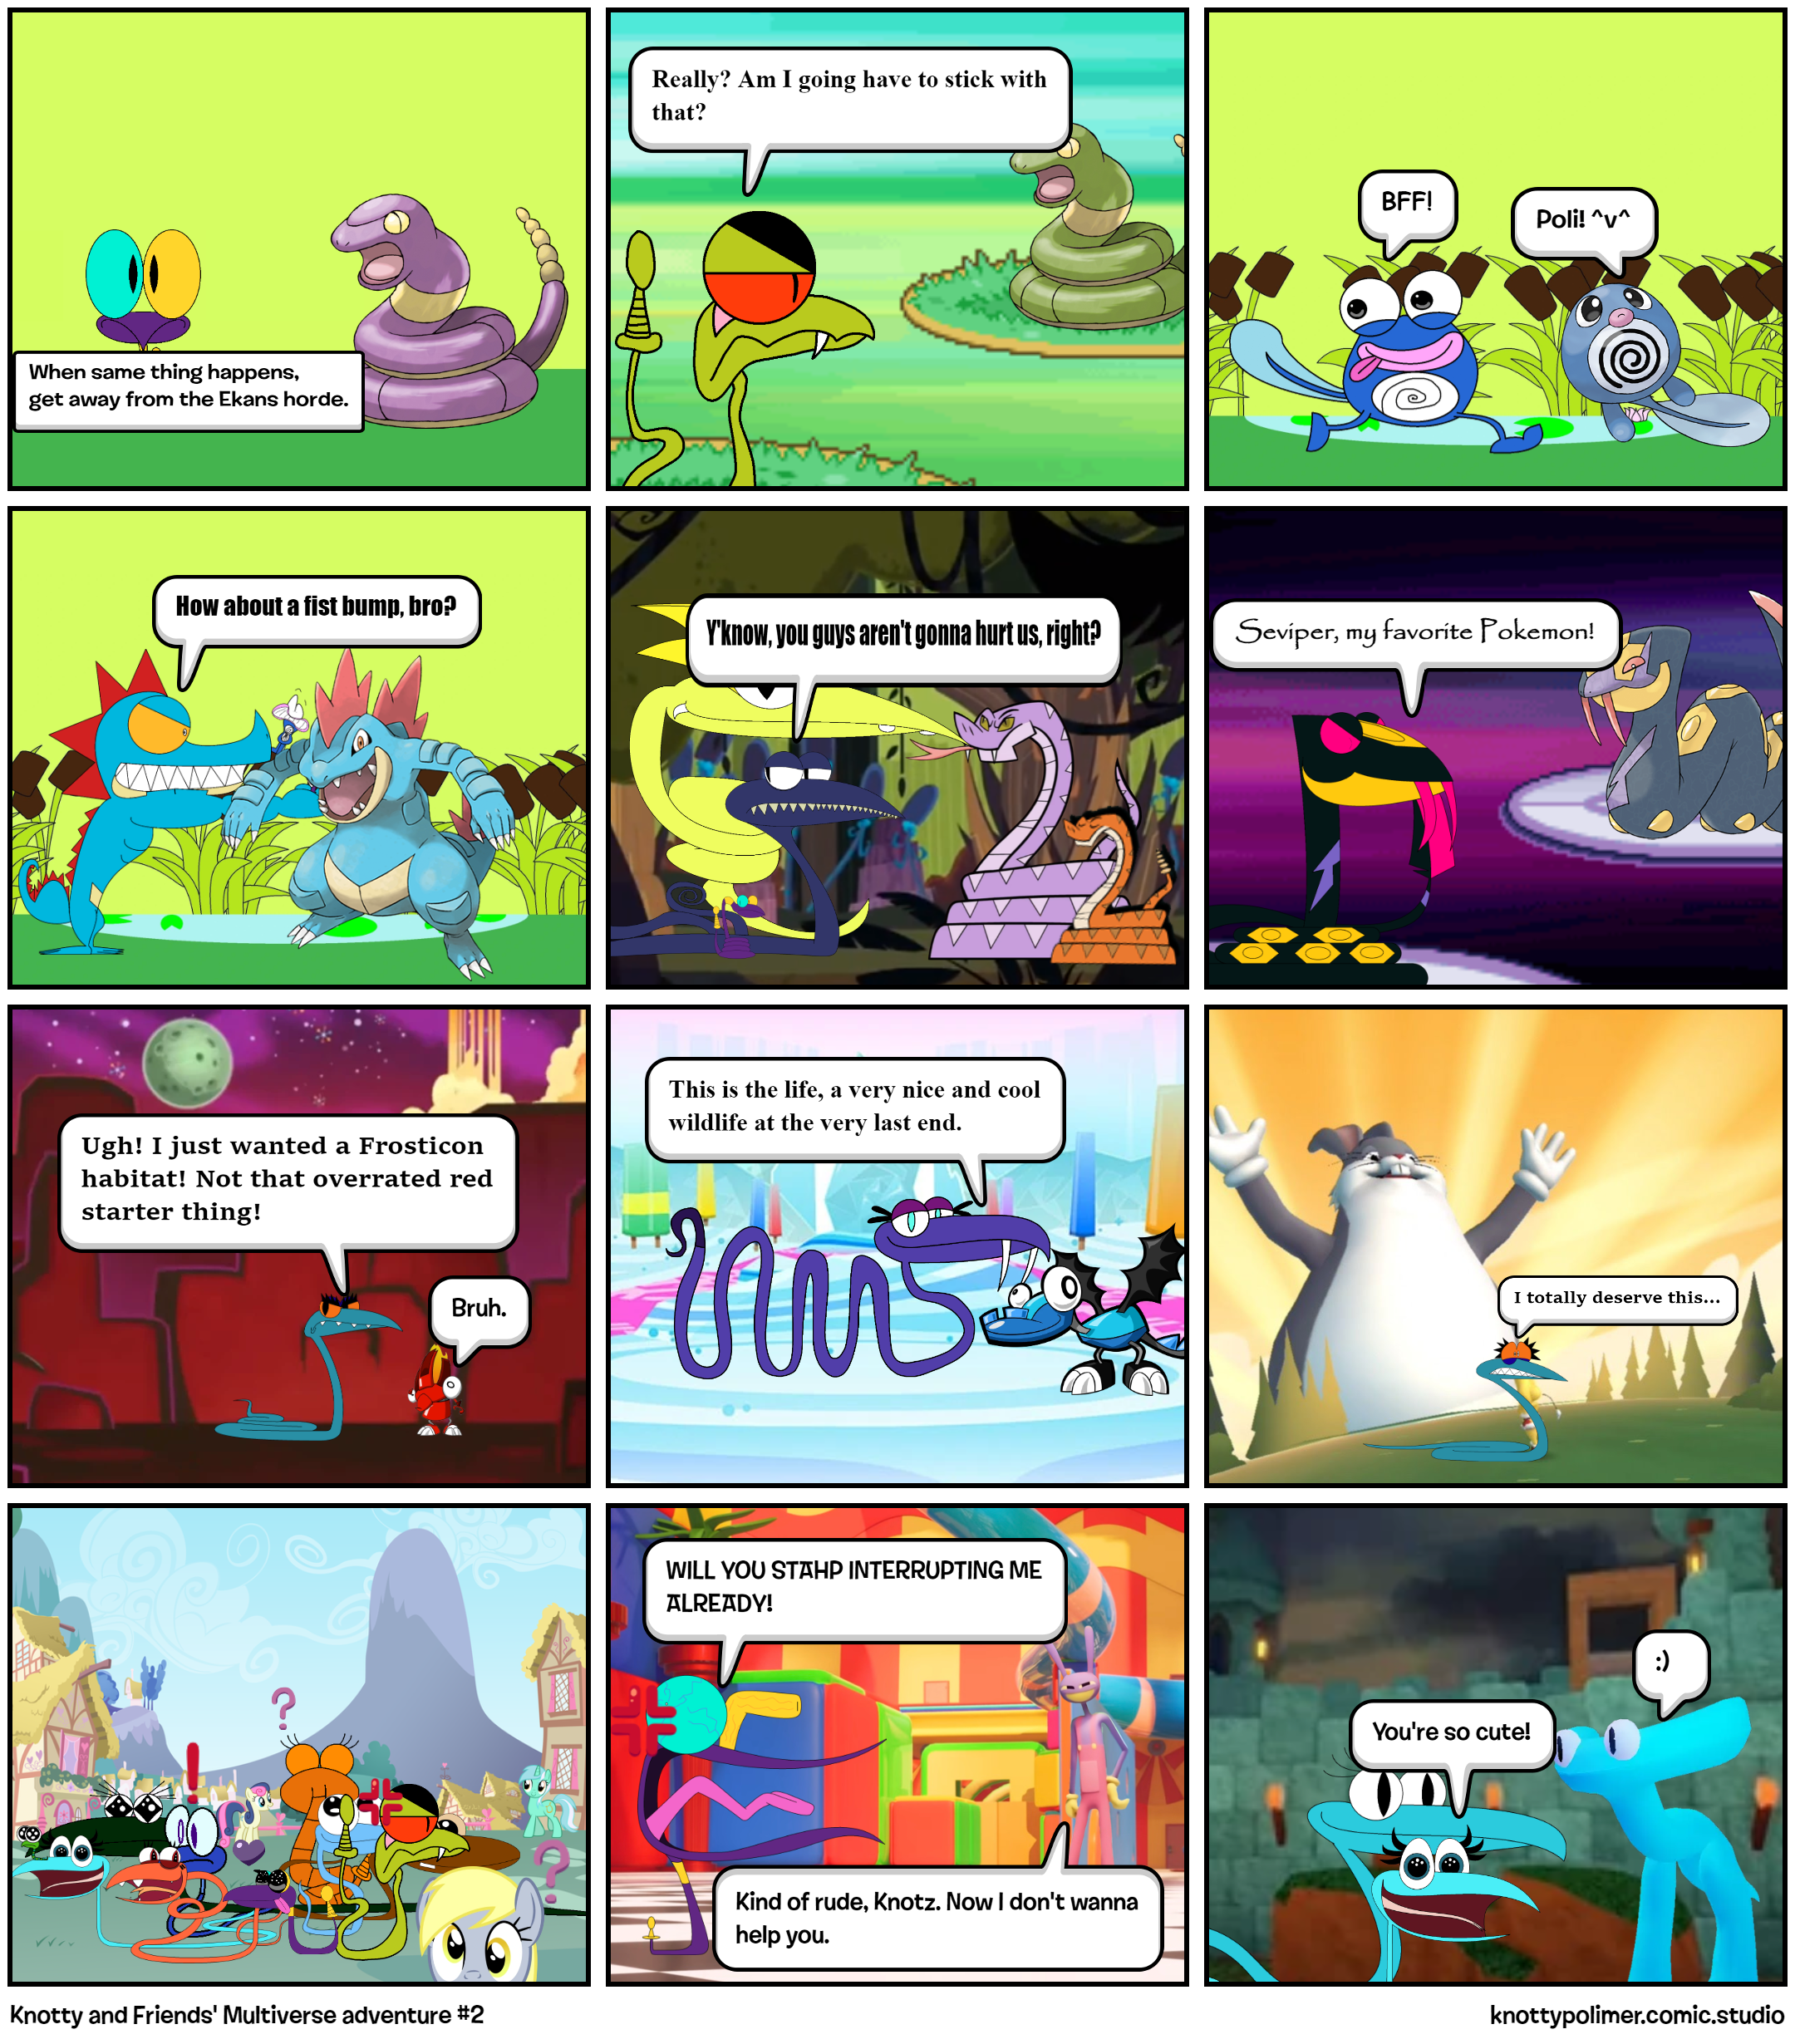 Knotty and Friends' Multiverse adventure #2